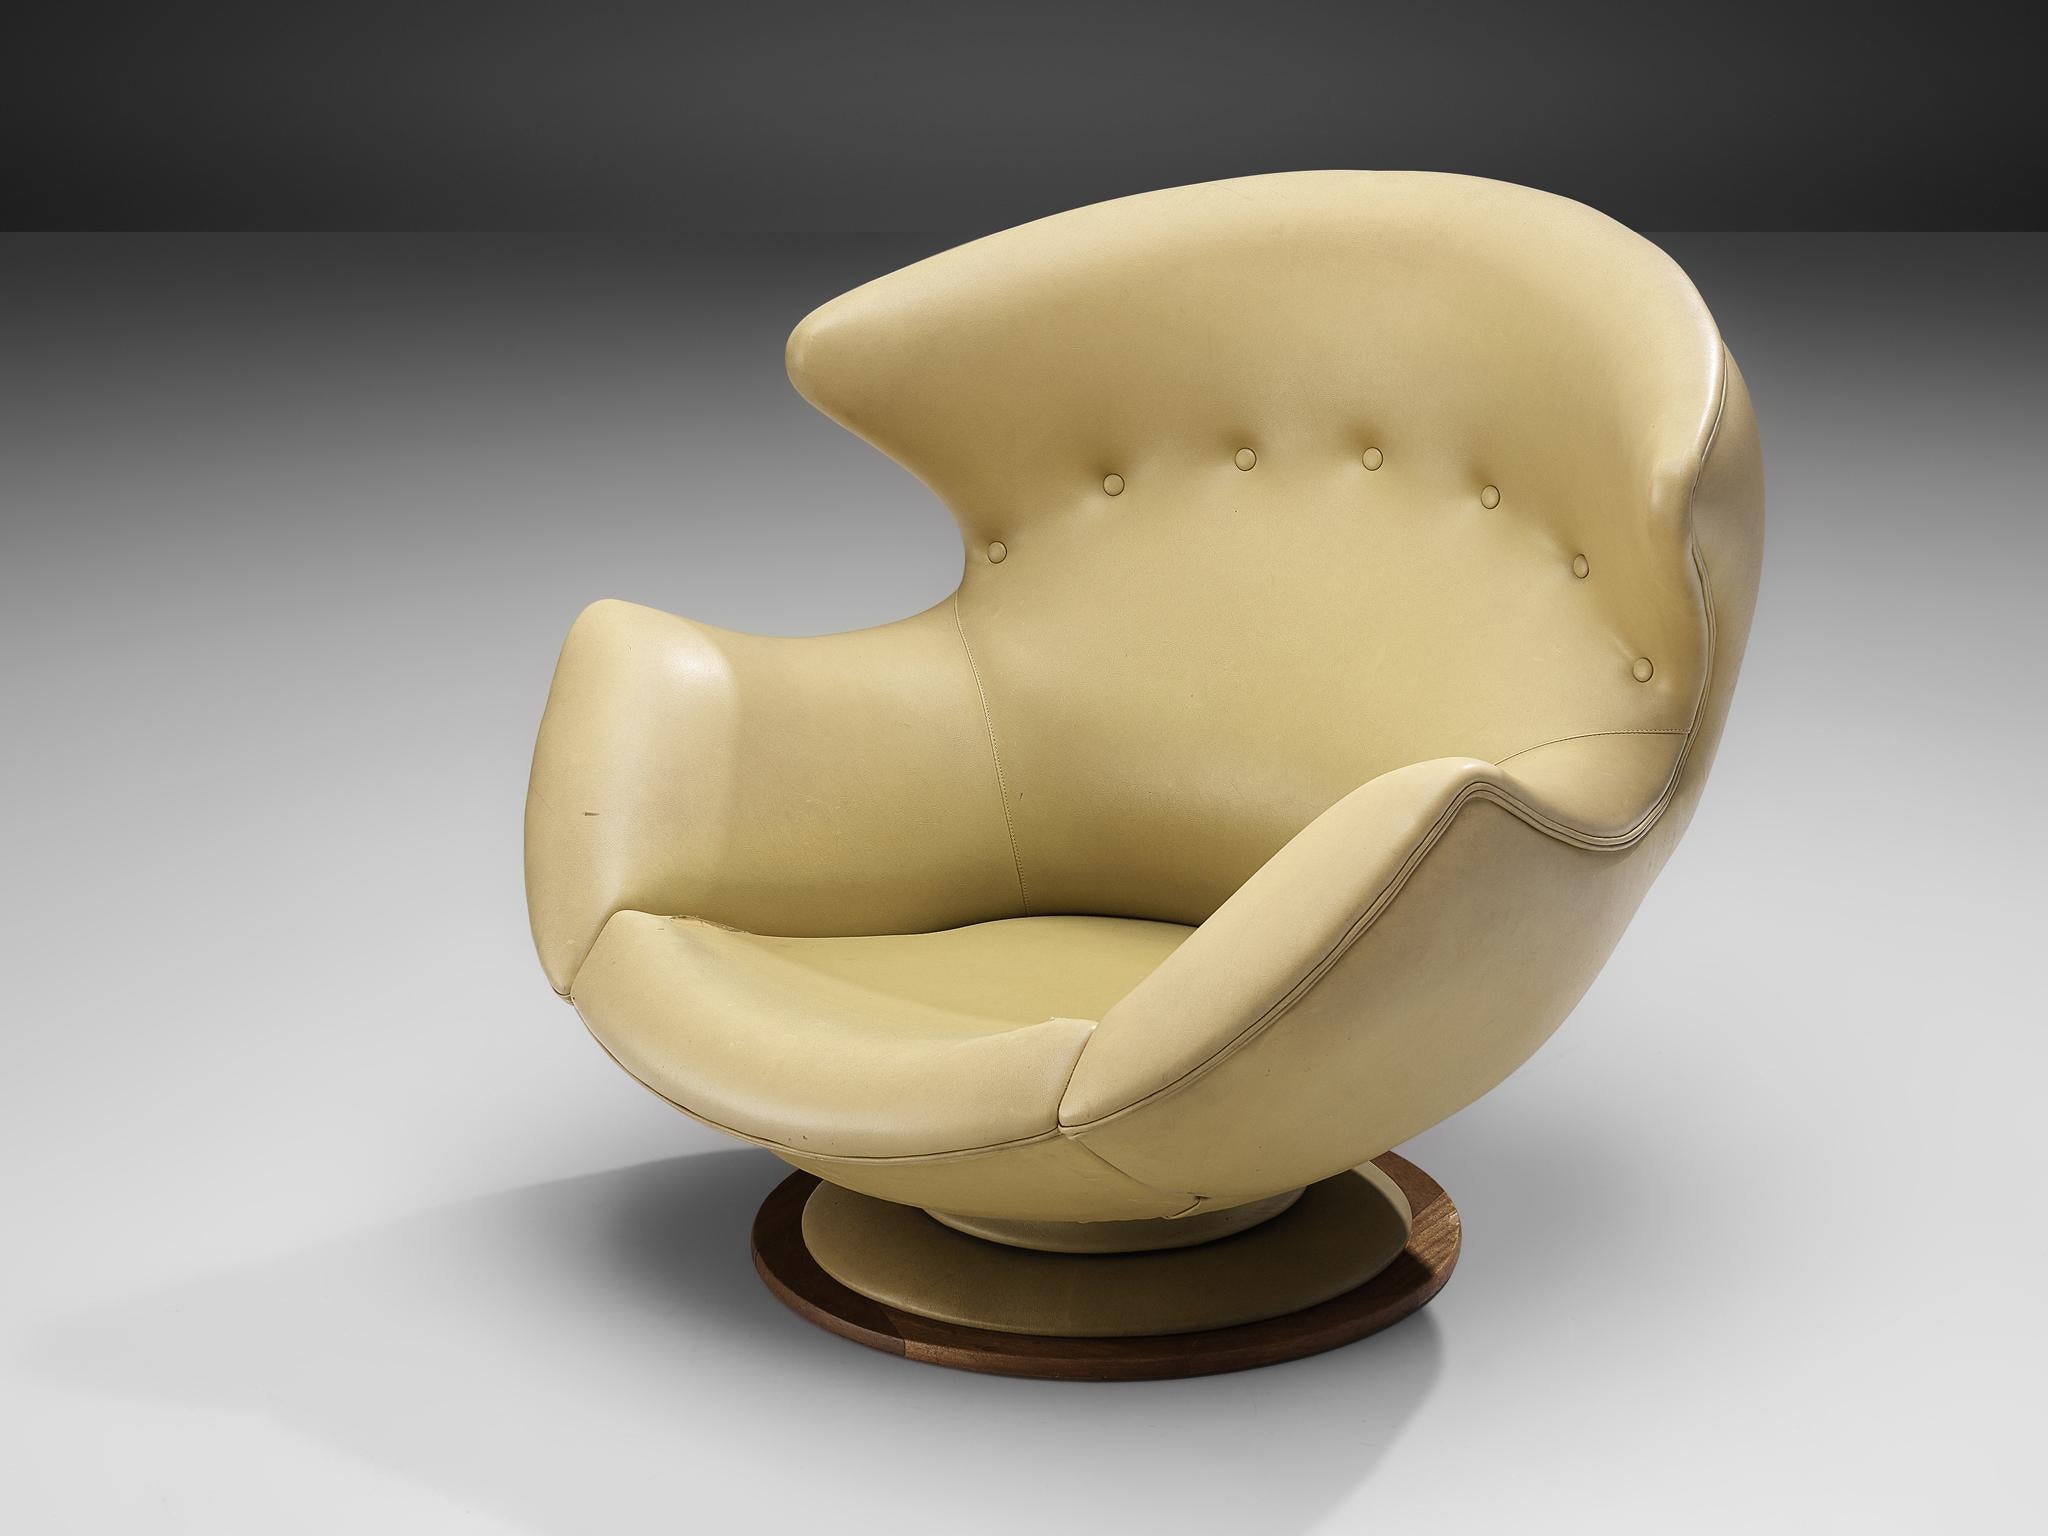 Lounge chair, leatherette, wood, Italy, 1970s

Large and comfortable winged lounge chair in yellow faux-leather upholstery. The rounded overall shape of the easy chair, with the wings reaching towards the armrests, makes sure that the chair almost